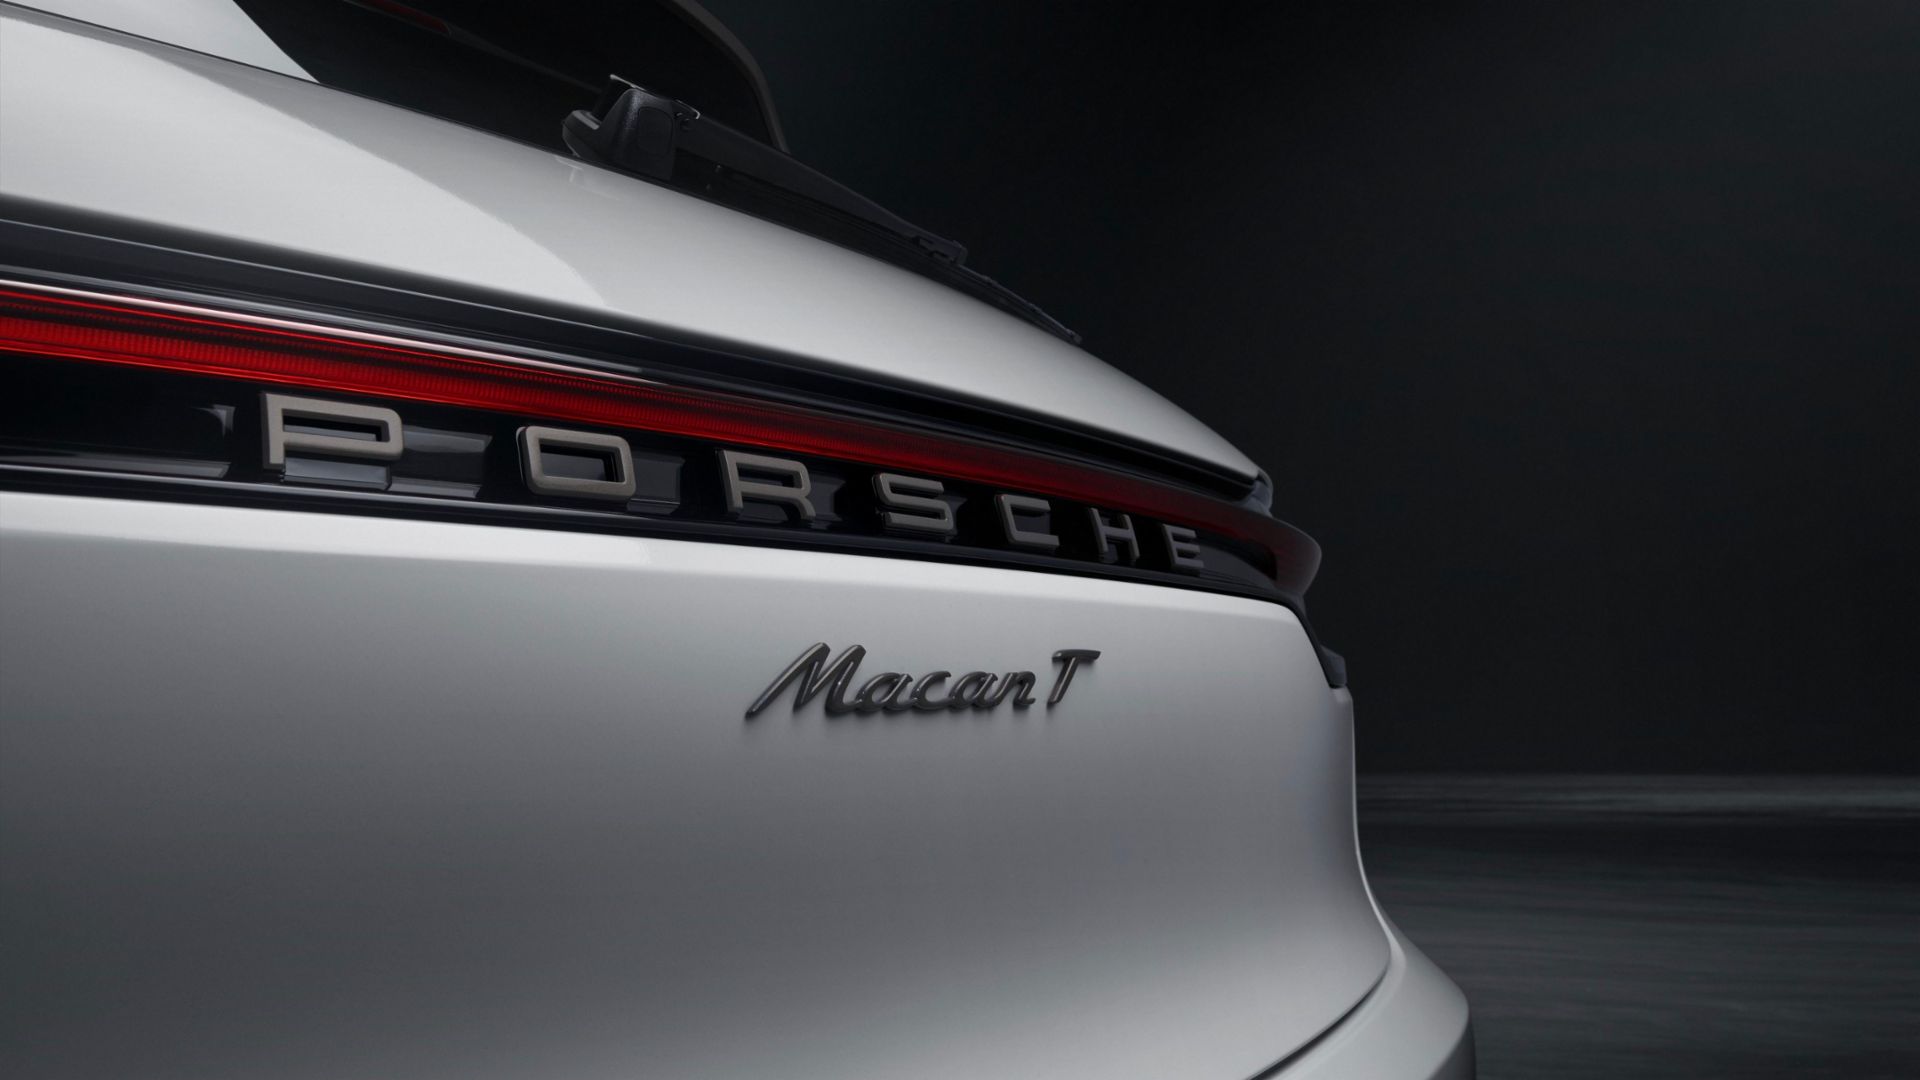 Porsche Macan T 2022: first SUV with the exclusive Touring designation